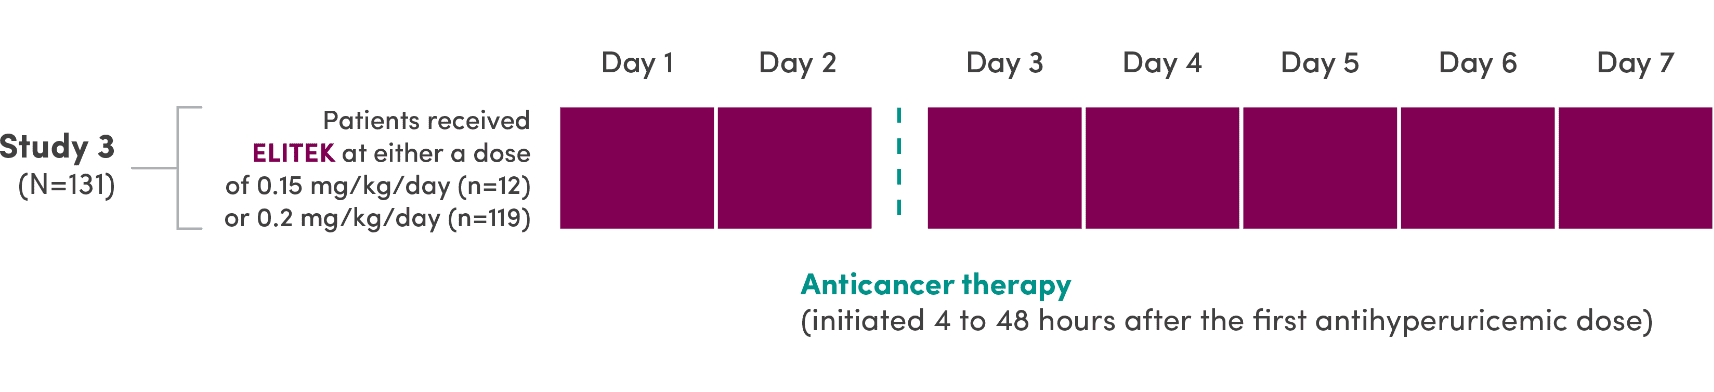 Study3 (N=131): Patients received ELITEK at either a dose of 0.15 mg/kg/day (n=12) or 0.2 mg/kg/day (n=119) for 7 days. Anticancer therapy was initiated 4 to 48 hours after the first antihyperuricemic dose.